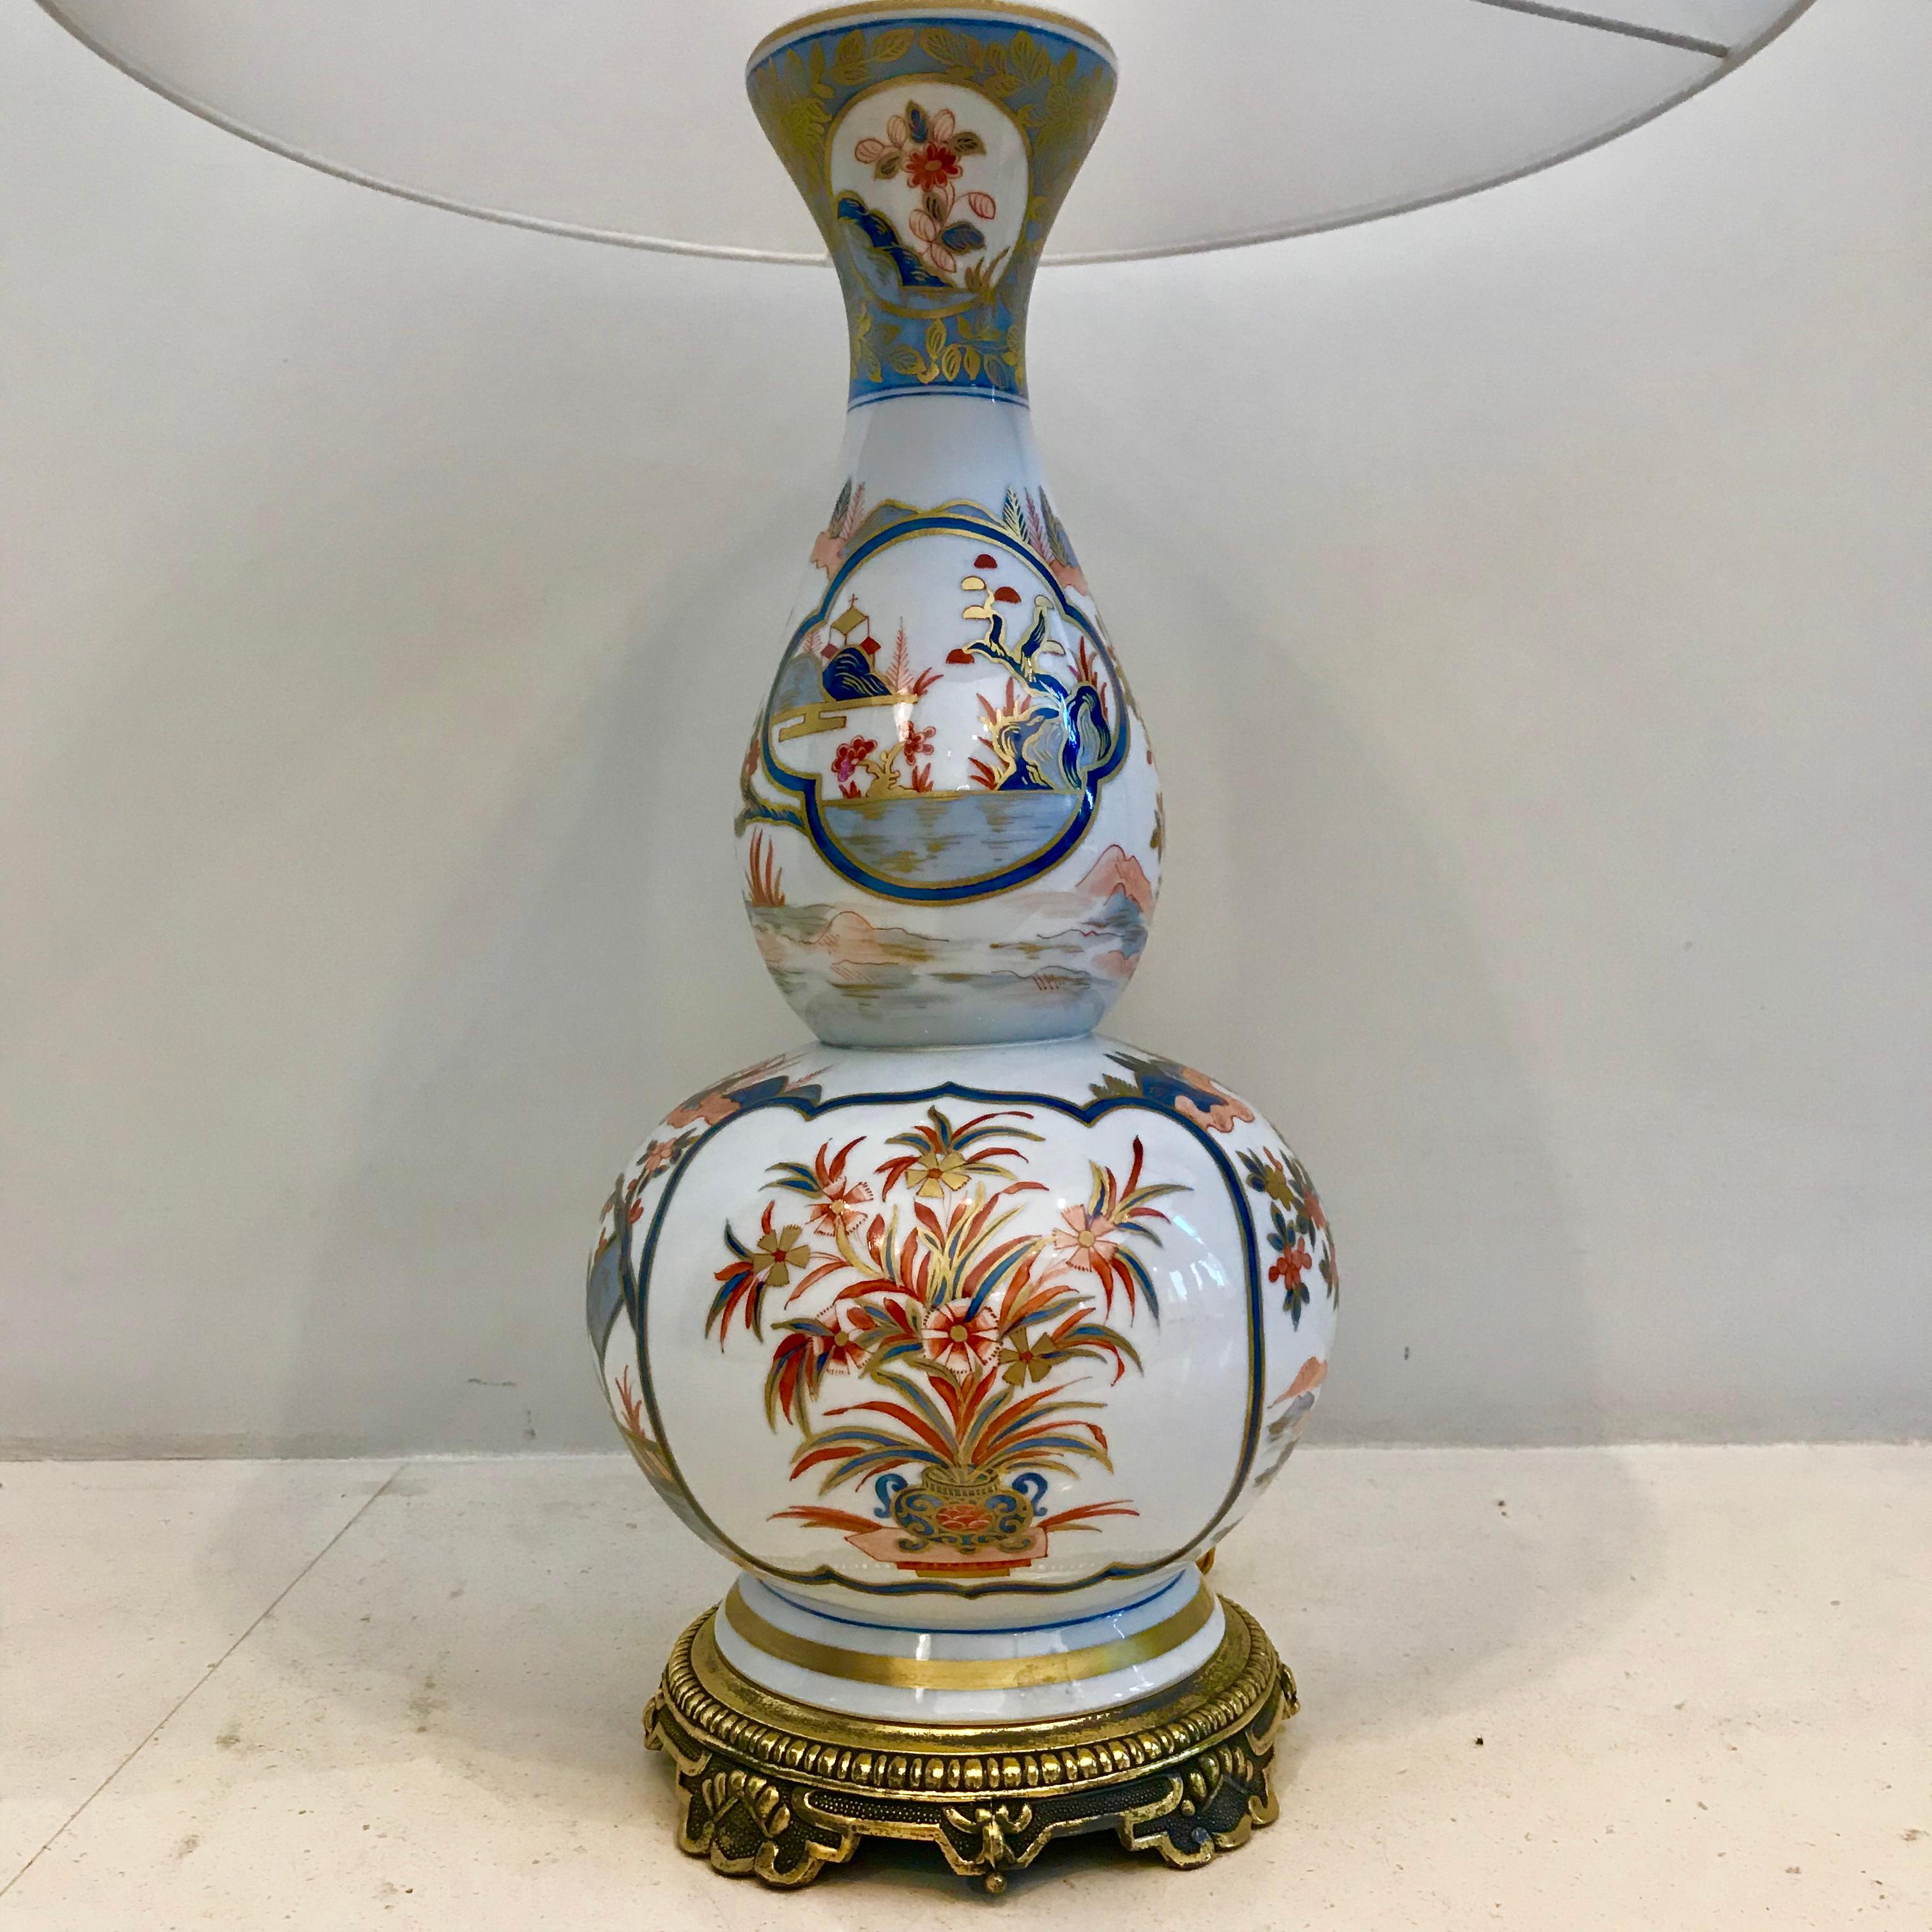 Antique double-gourd hand painted Imari porcelain table lamp having the classical blue, red and gold colors. With a garden scene and flowers in blue vase. The upper and bottom part is nicely brass-mounted.